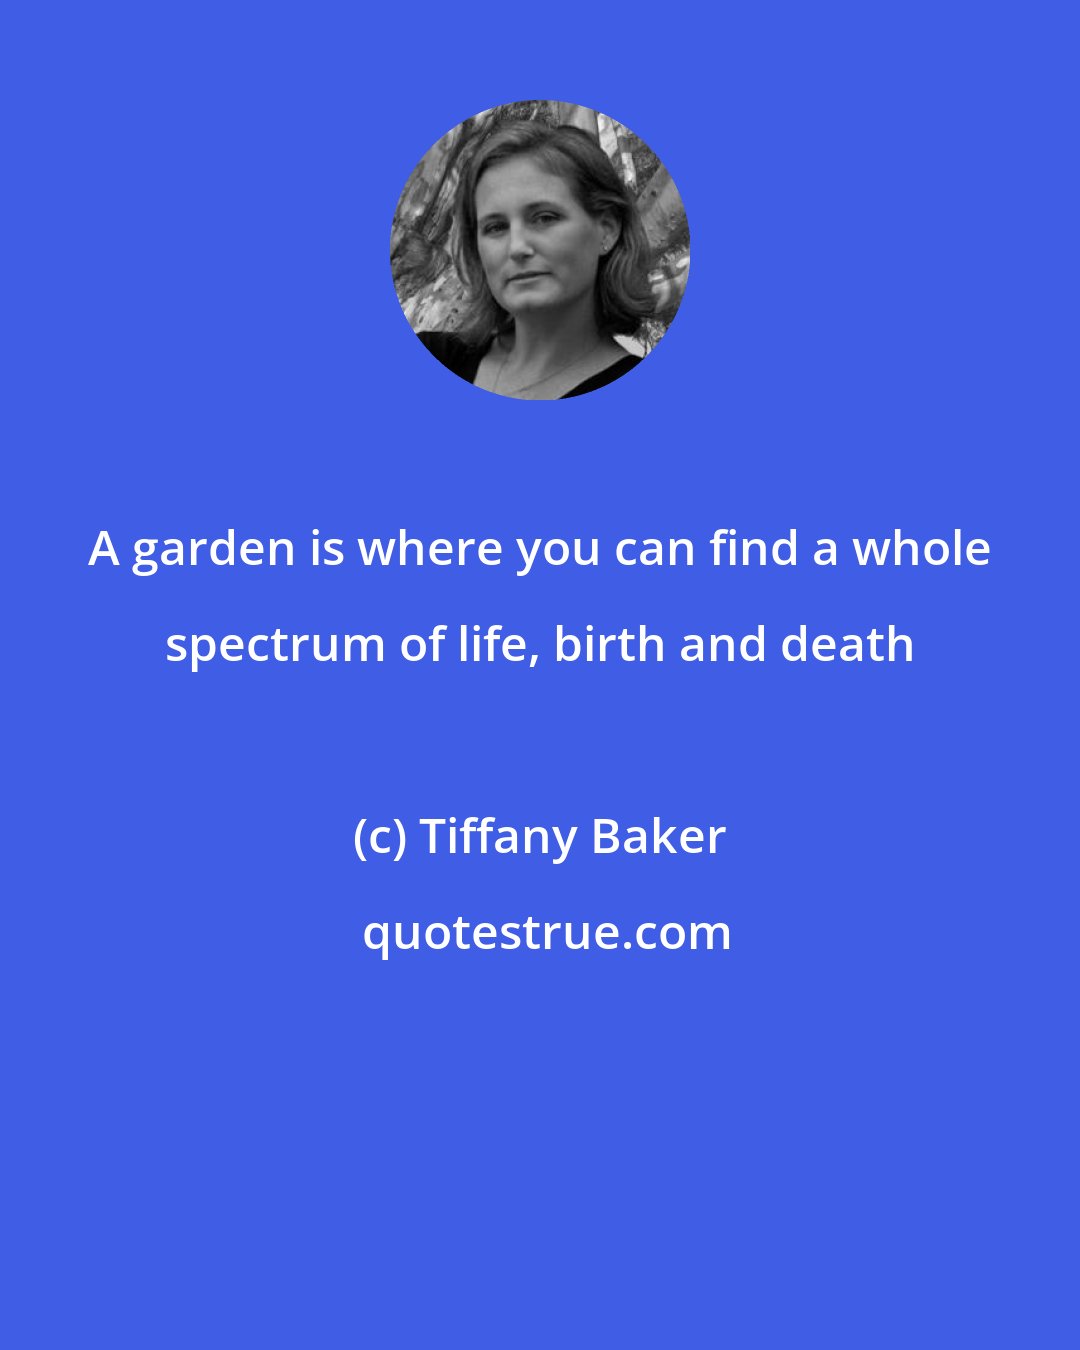 Tiffany Baker: A garden is where you can find a whole spectrum of life, birth and death